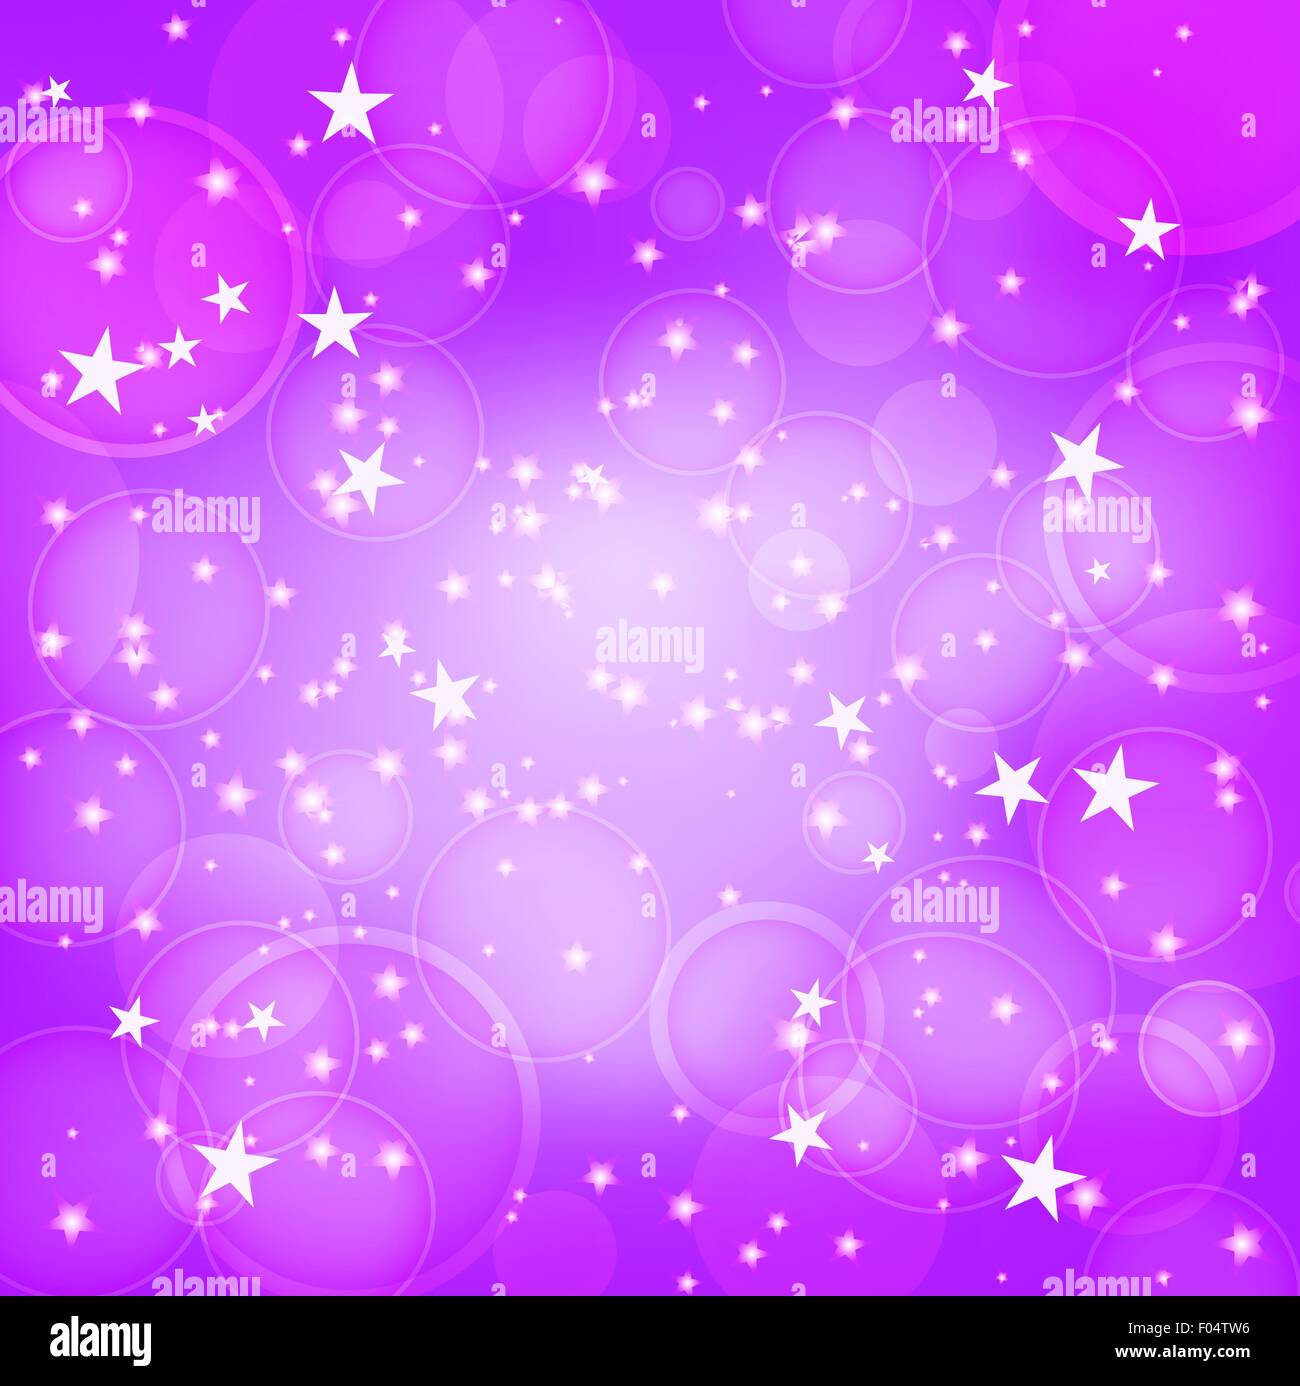 shining purple background with stars Stock Vector